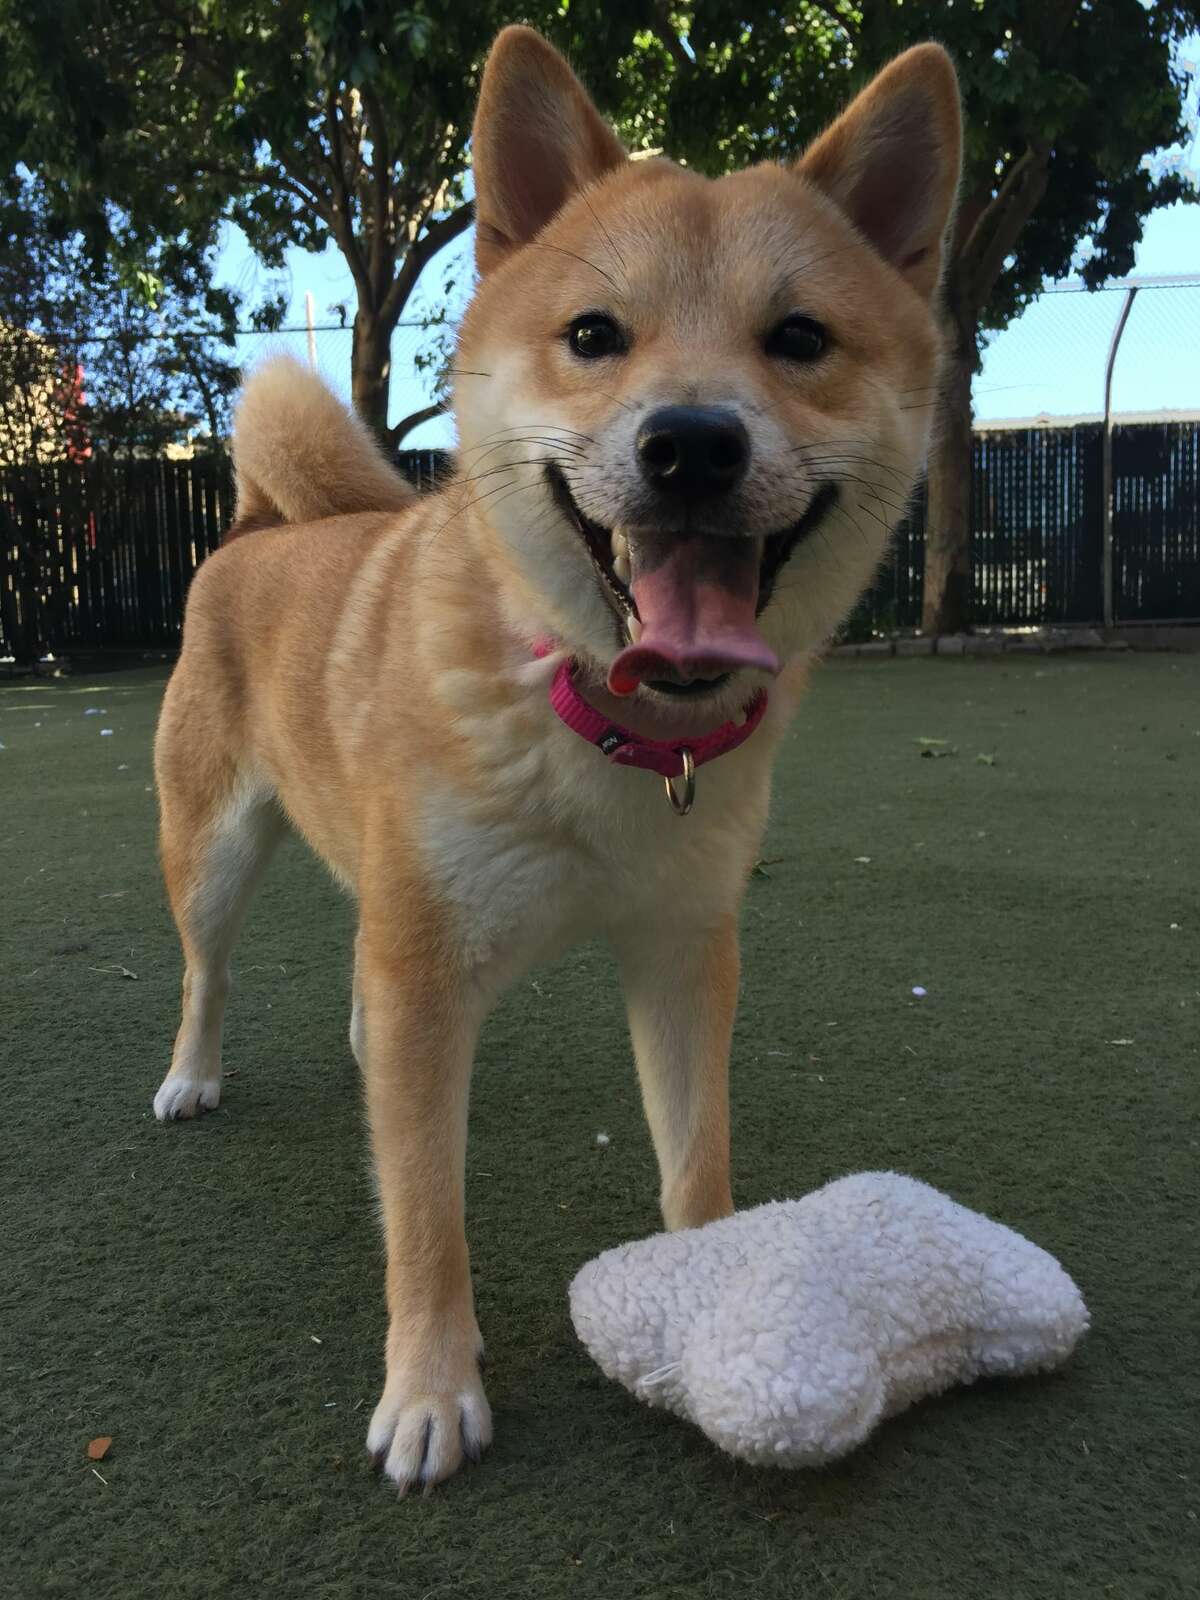 The owner of this Shiba Inu has been sentenced to probation for graphic animal abuse that was caught on an elevator camera. Aniki is now being cared for at Northern Nevada Shiba Rescue, where the staff will work to find a permanent home for him.